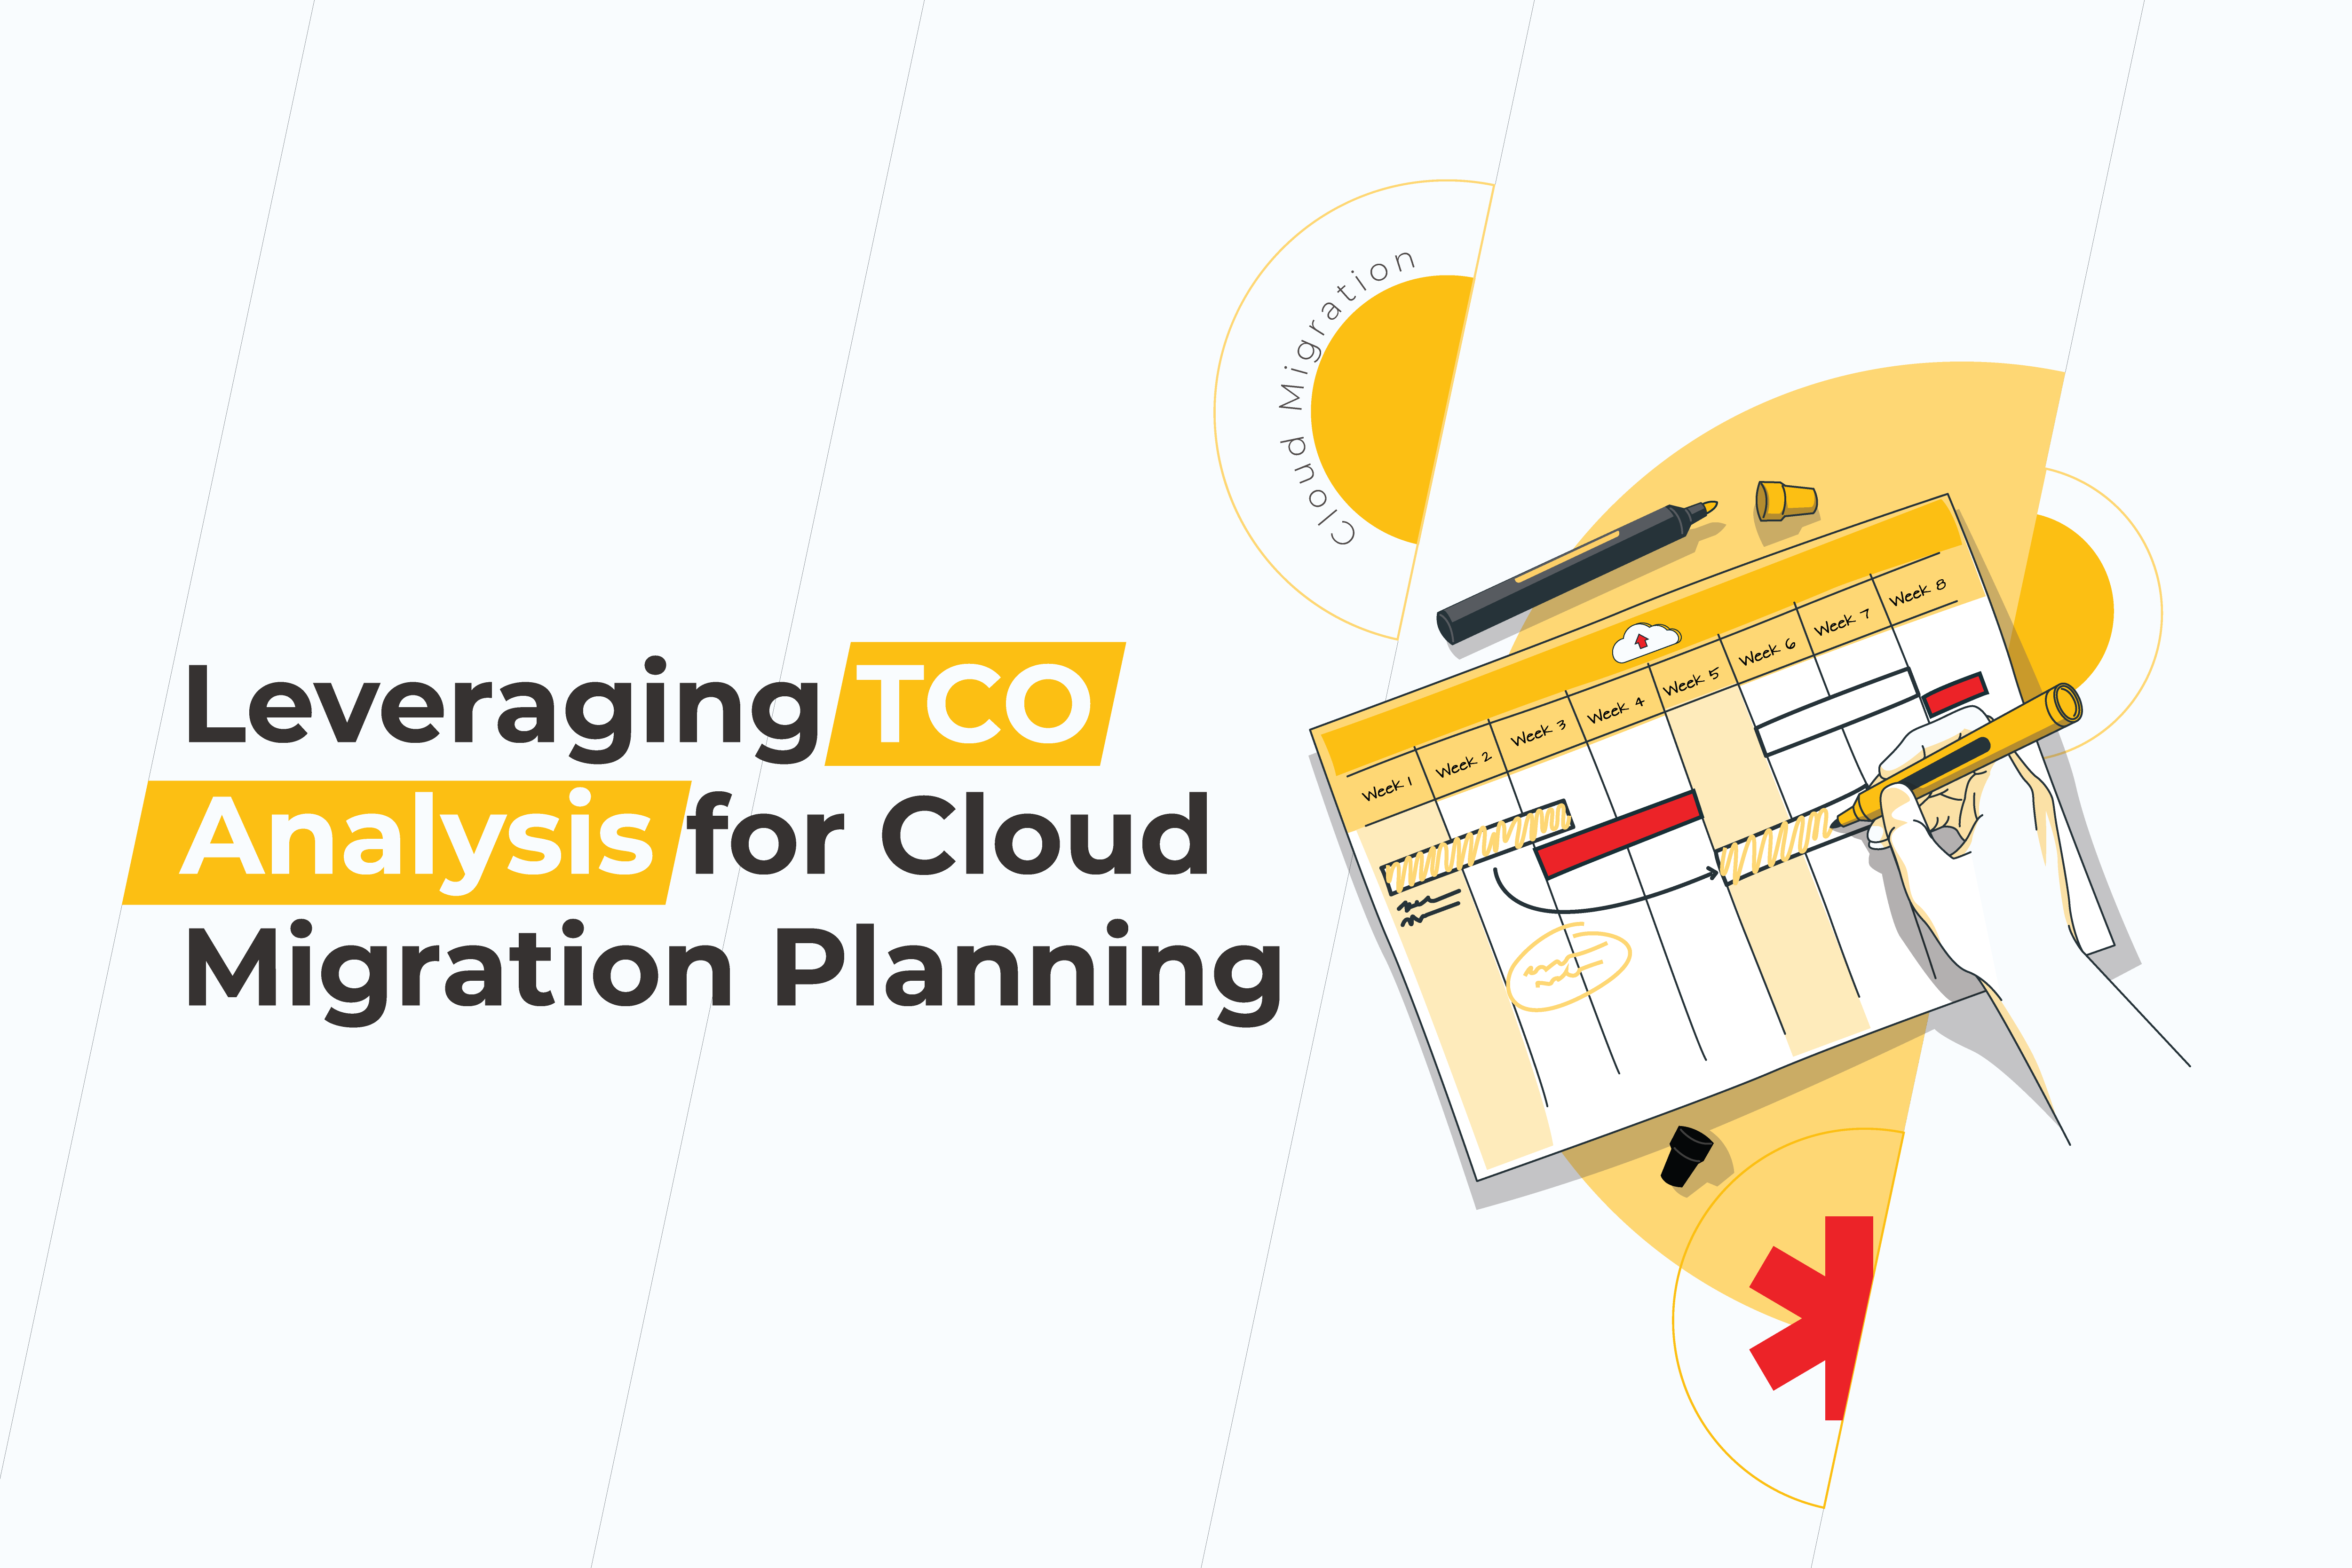 Leveraging TCO Analysis for Cloud Migration Planning